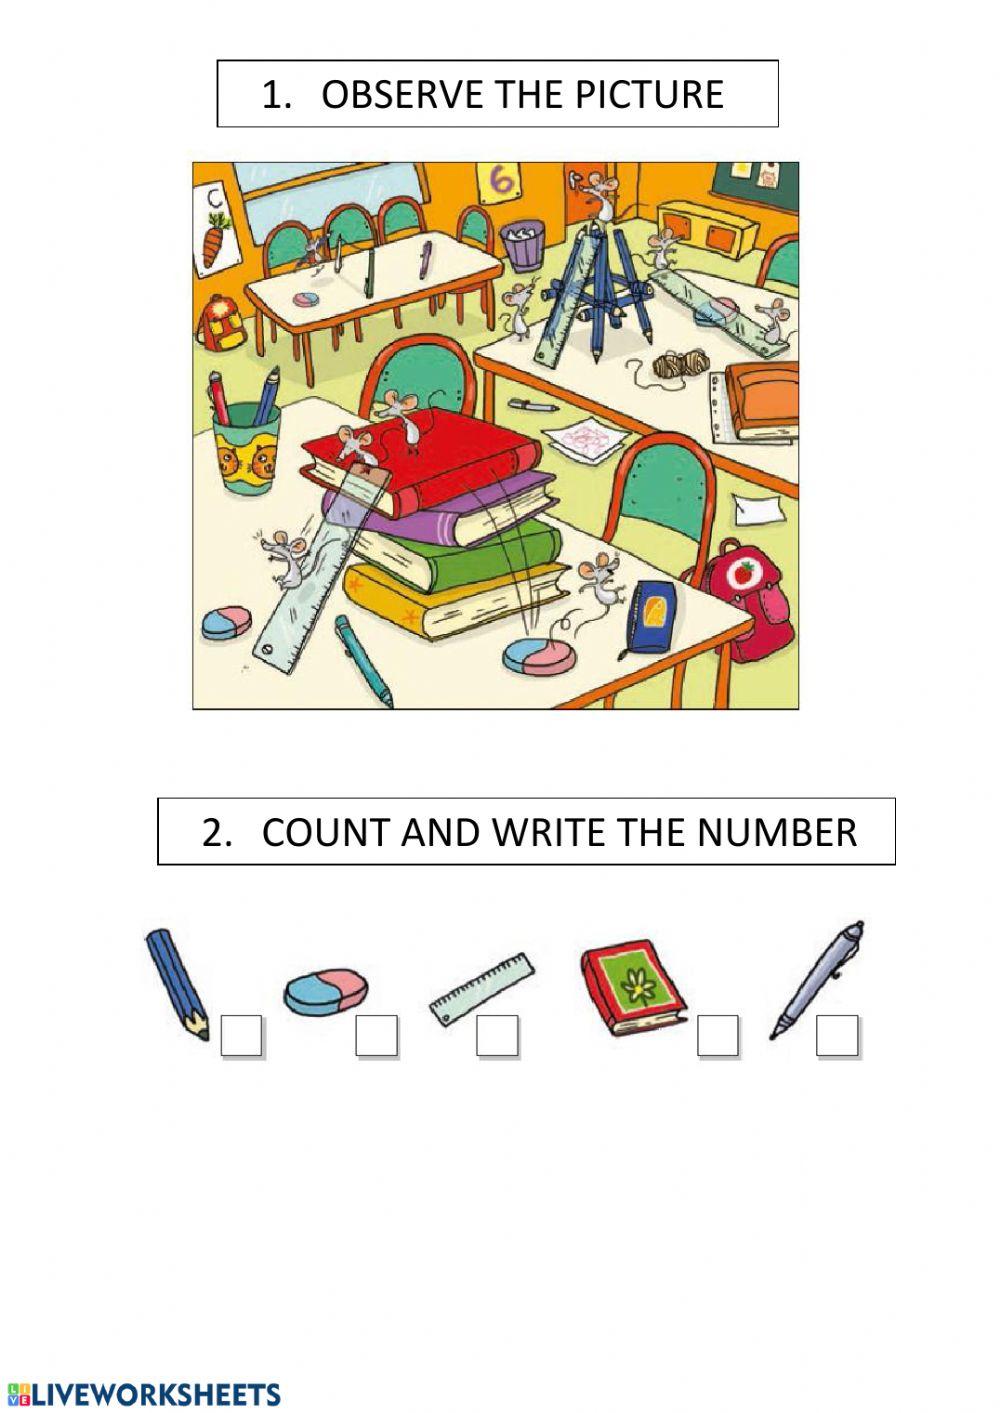 COUNT AND WRITE